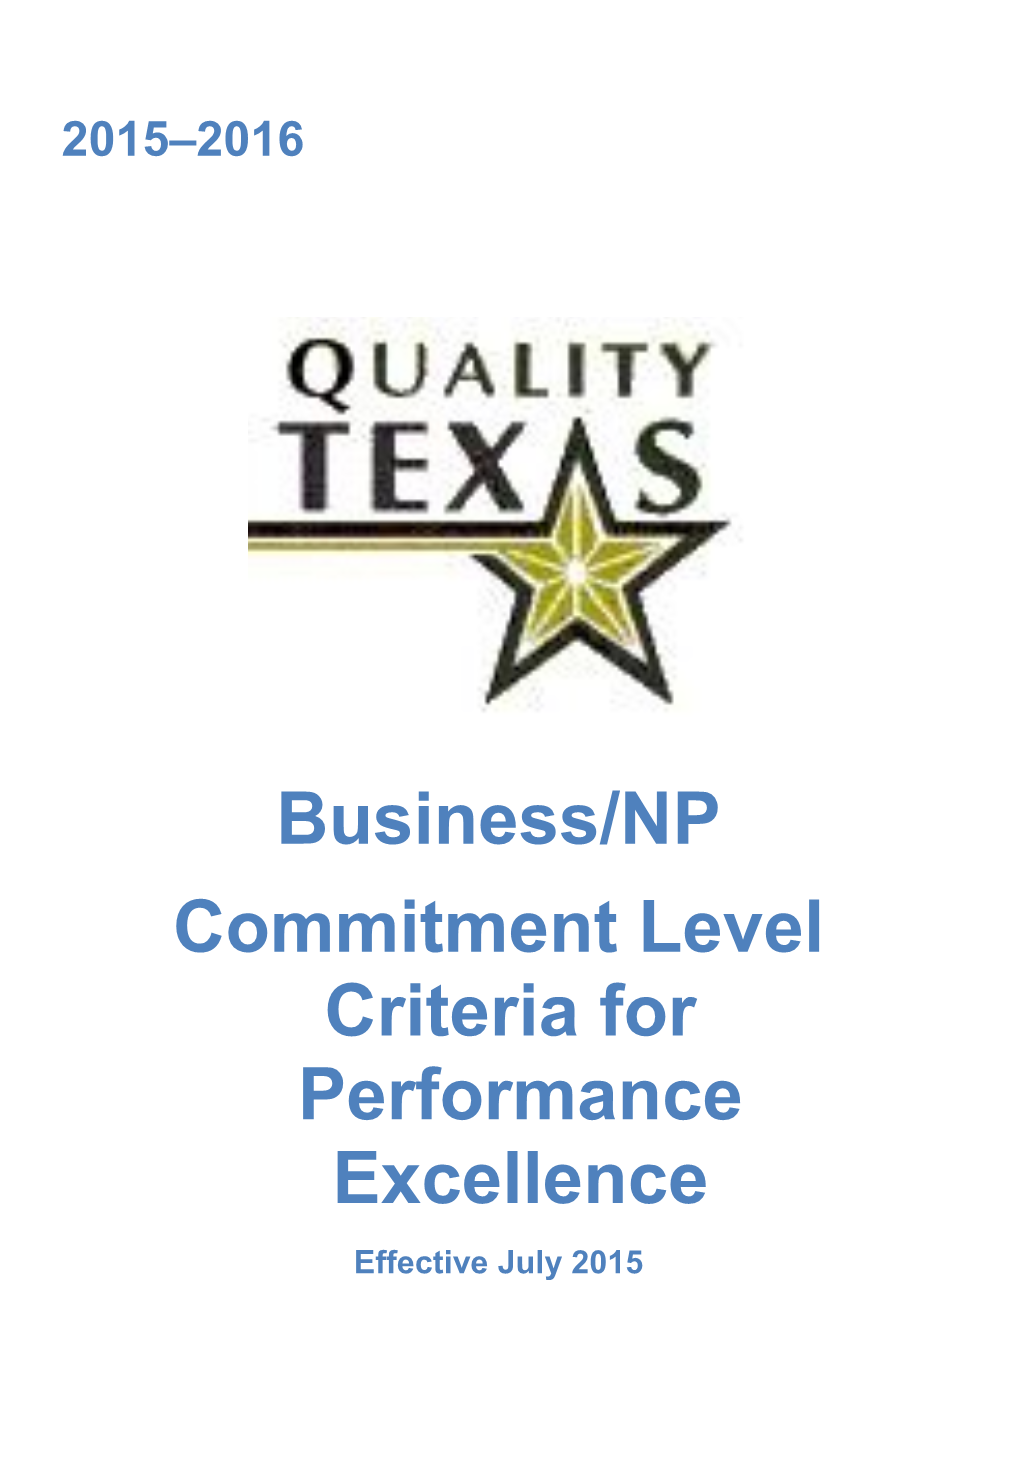 Commitment Level Criteria for Performance Excellence